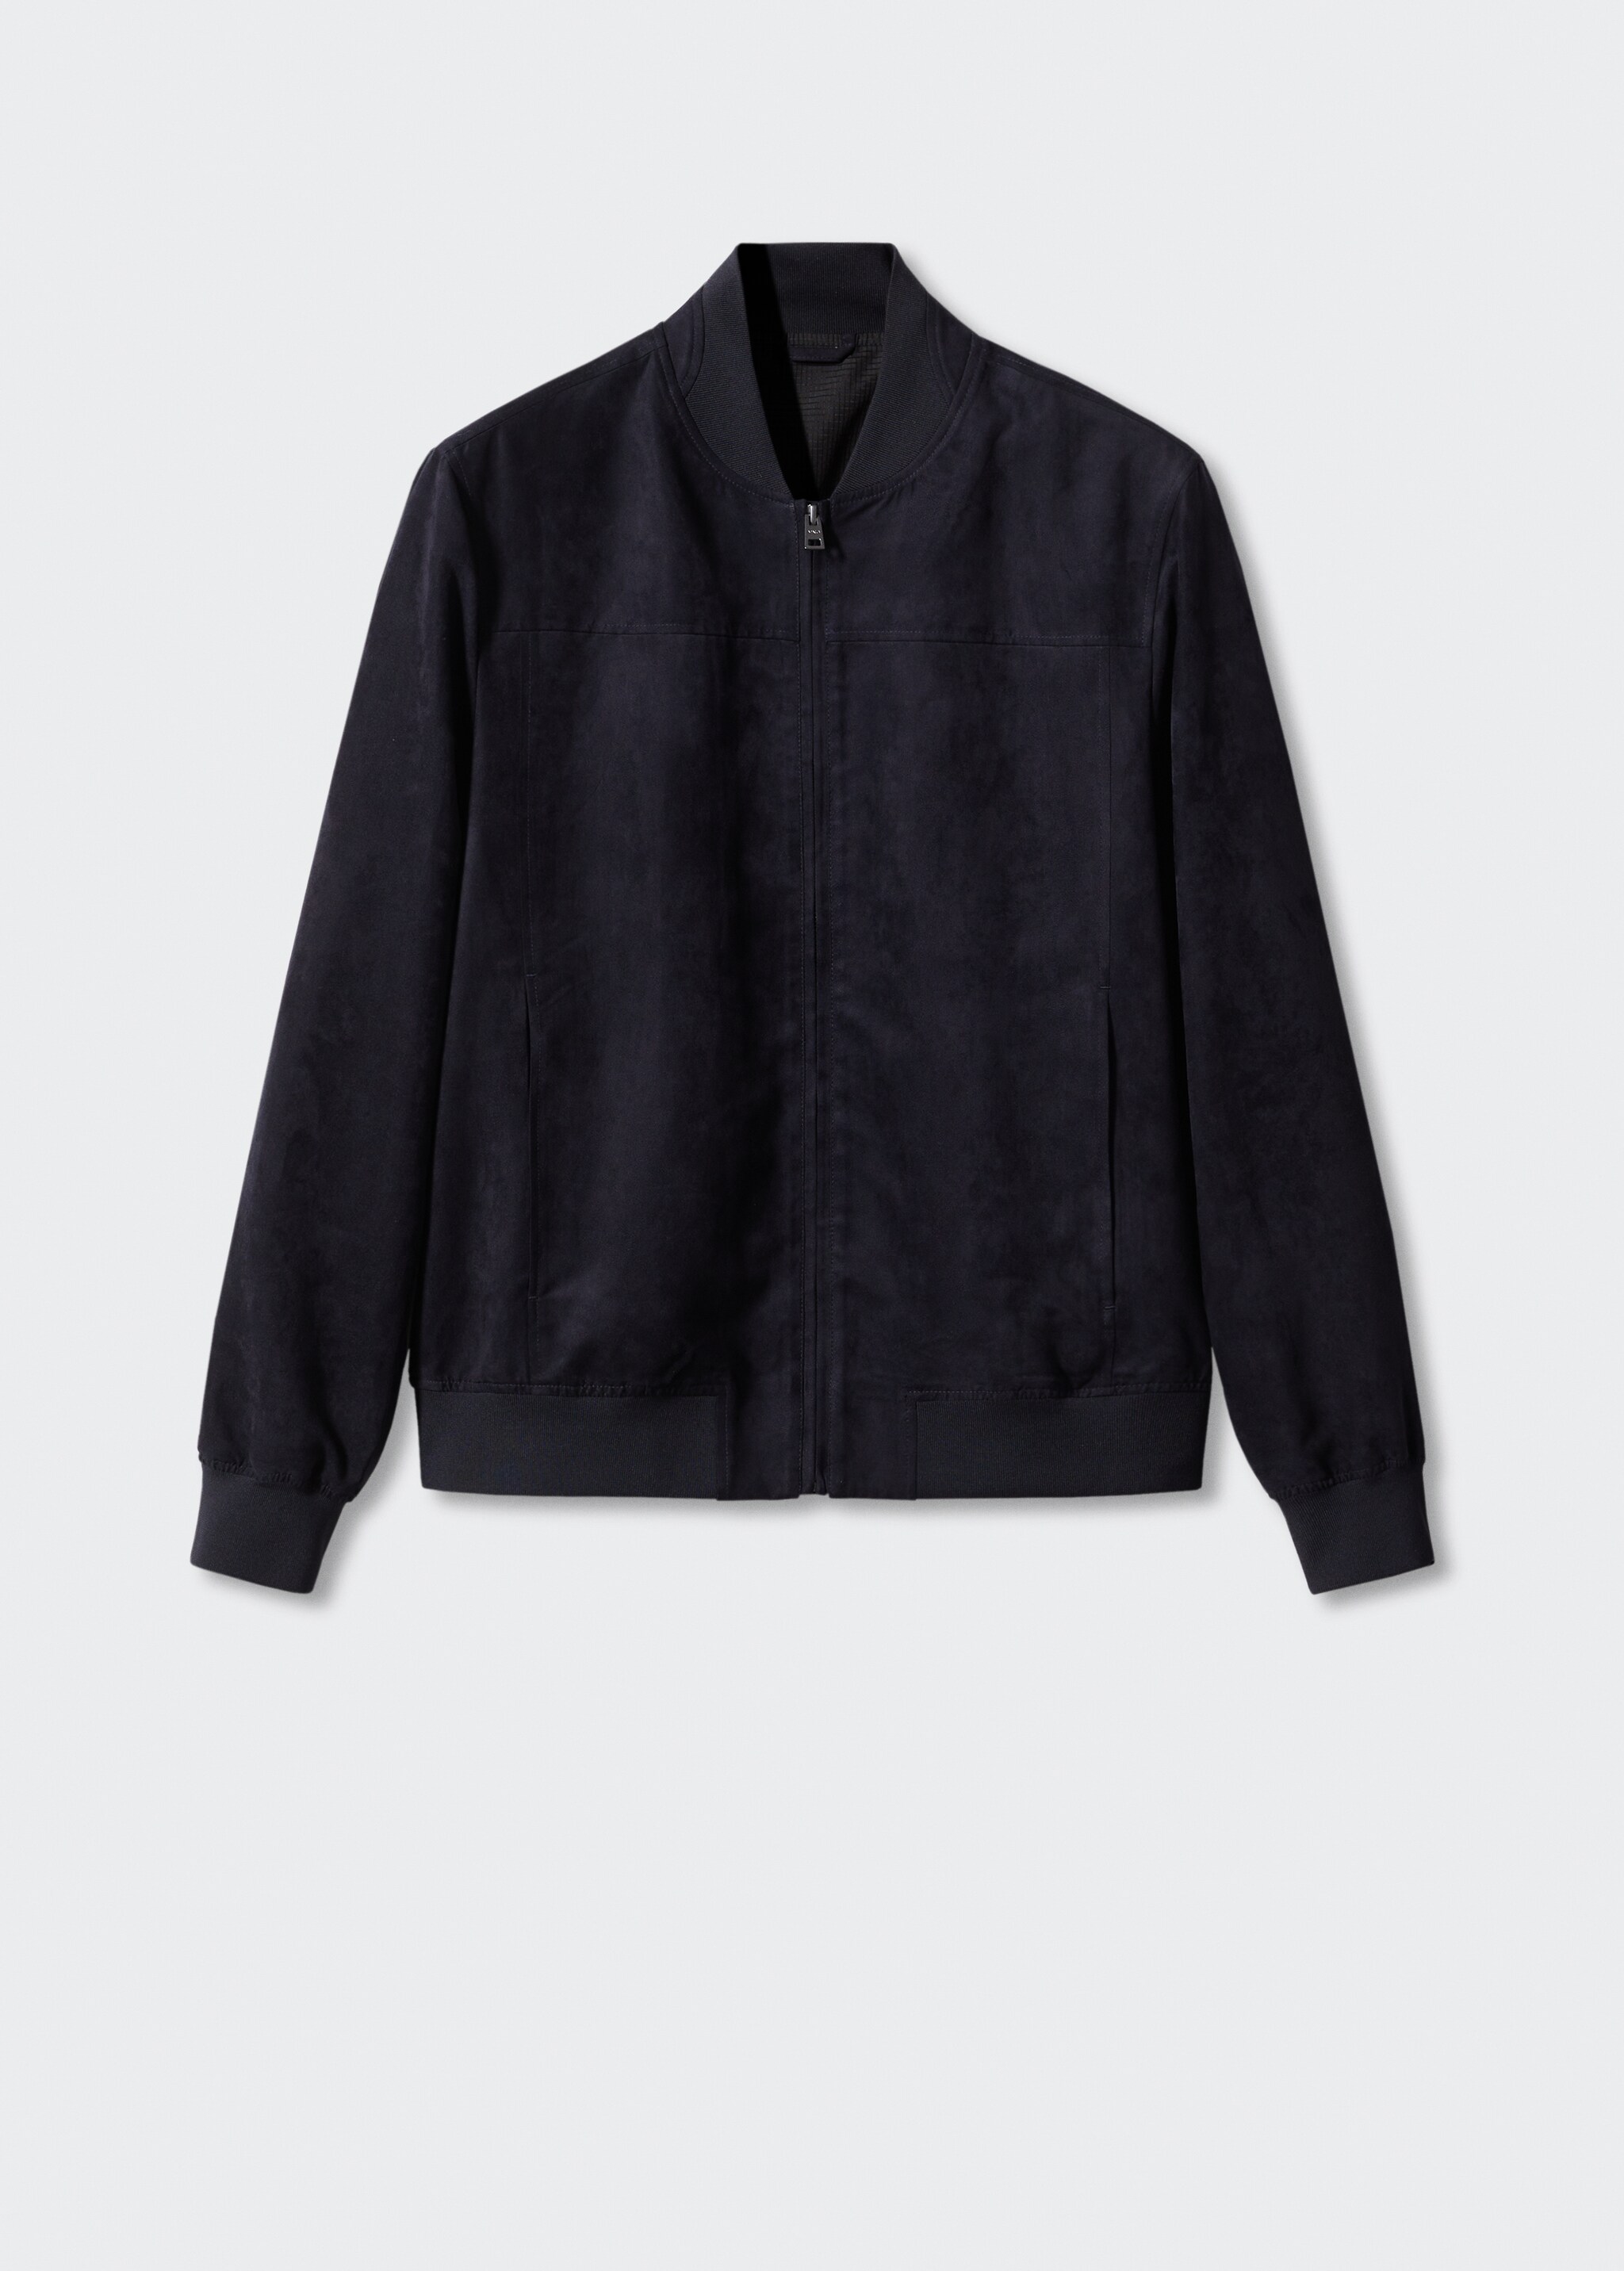 Suede-effect bomber jacket - Article without model